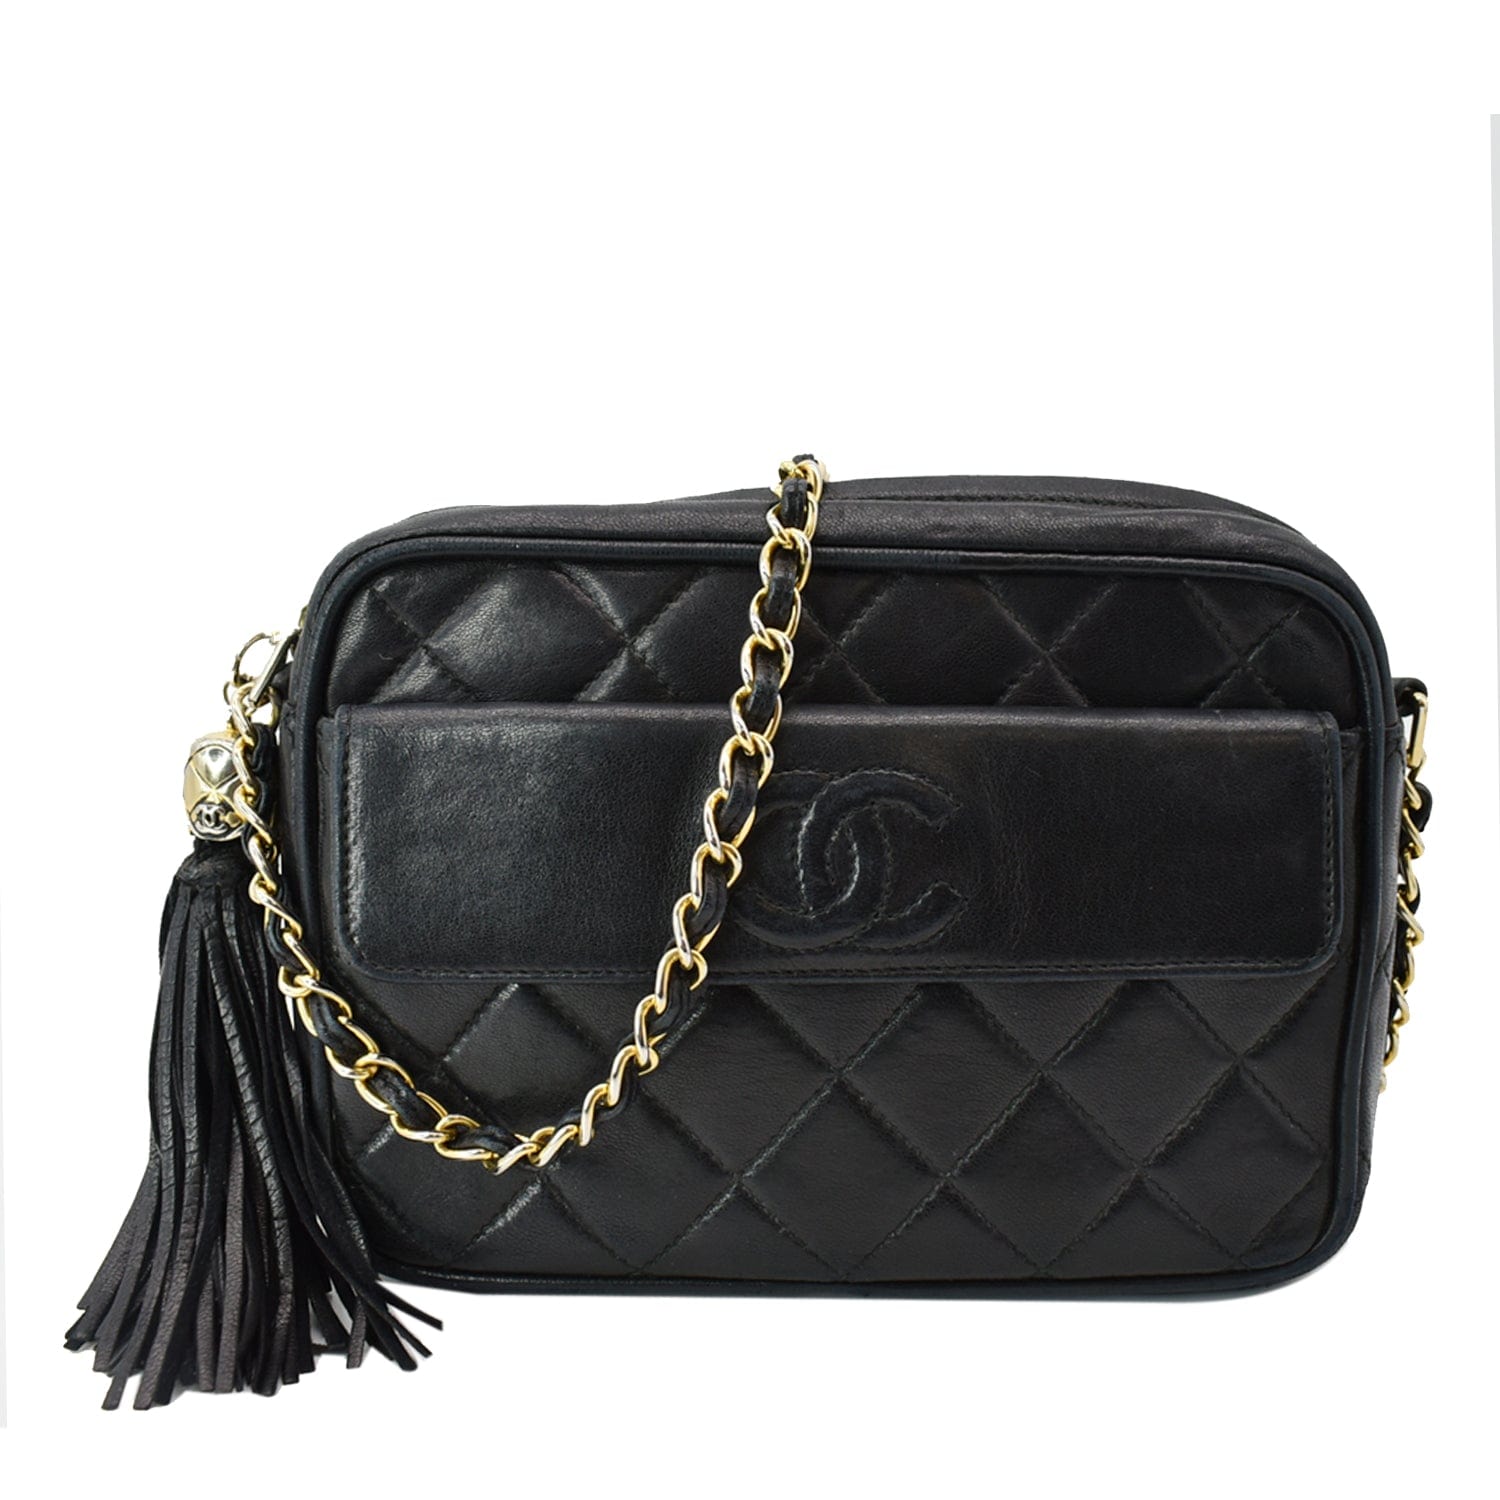 used Pre-owned Authenticated Chanel Small Fringe Shopping Bag Lambskin Leather Black Shoulder Bag Unisex (New with Defects), Adult Unisex, Size: XL